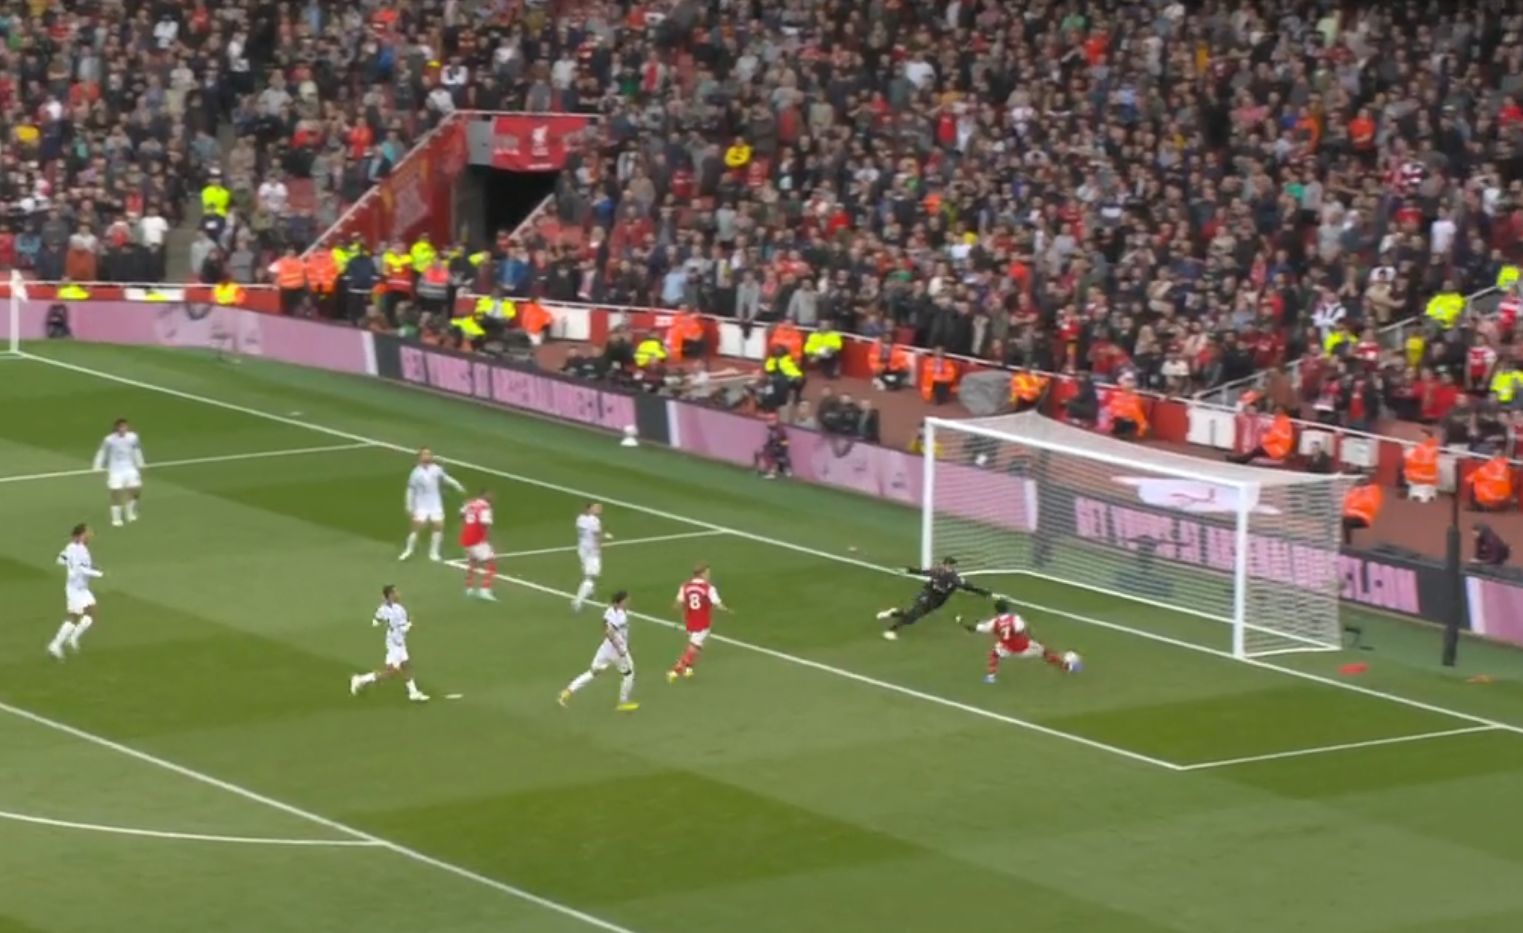 Video: Arsenal counter-attack provides crucial goal before halftime